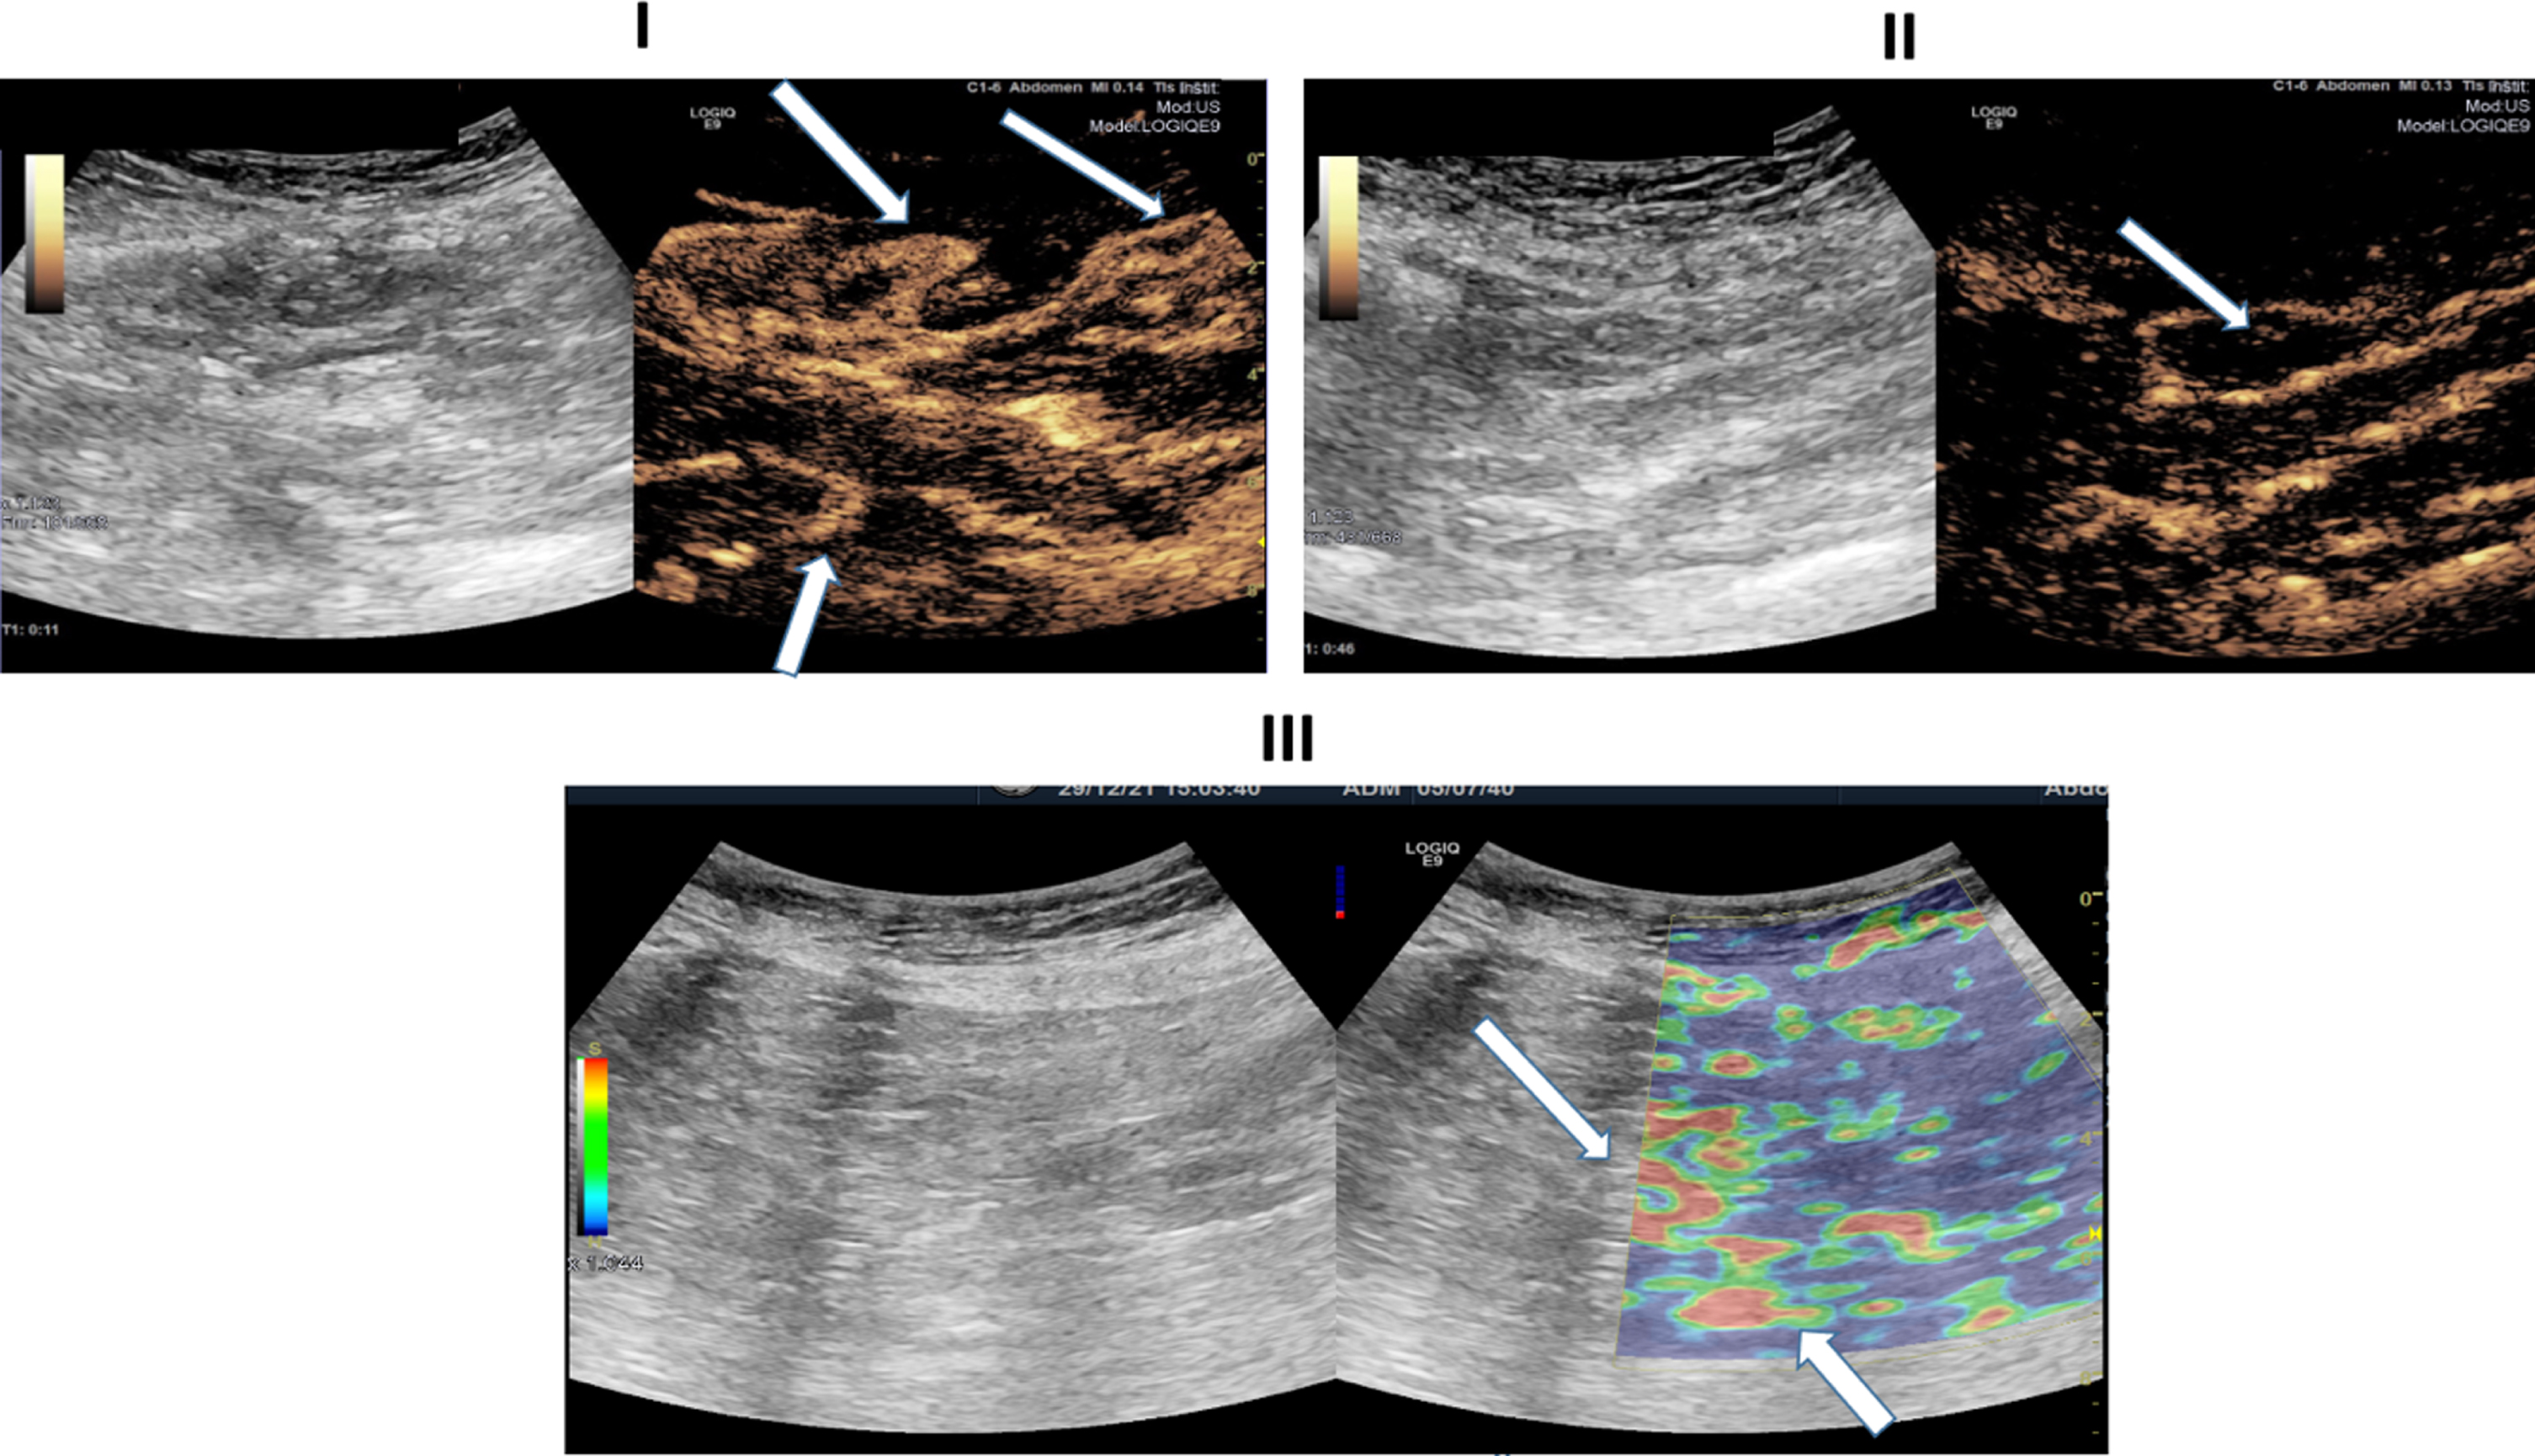 Ultrasound images of a 81-years-old patient with severe COVID-19 disease. I: B-Mode ultrasound showing intestinal wall thickening. CEUS image showing early and pronounced arterial hyperenhancement of the intestinal wall (white arrows) 11 seconds after SonoVue application. II: CEUS imaging depiciting translocation of microbubbles (white arrows) into the intestinal lumen. III: Soft tissue edema as a correlate of acute inflammation diagnosed by strain elastography (white arrows).